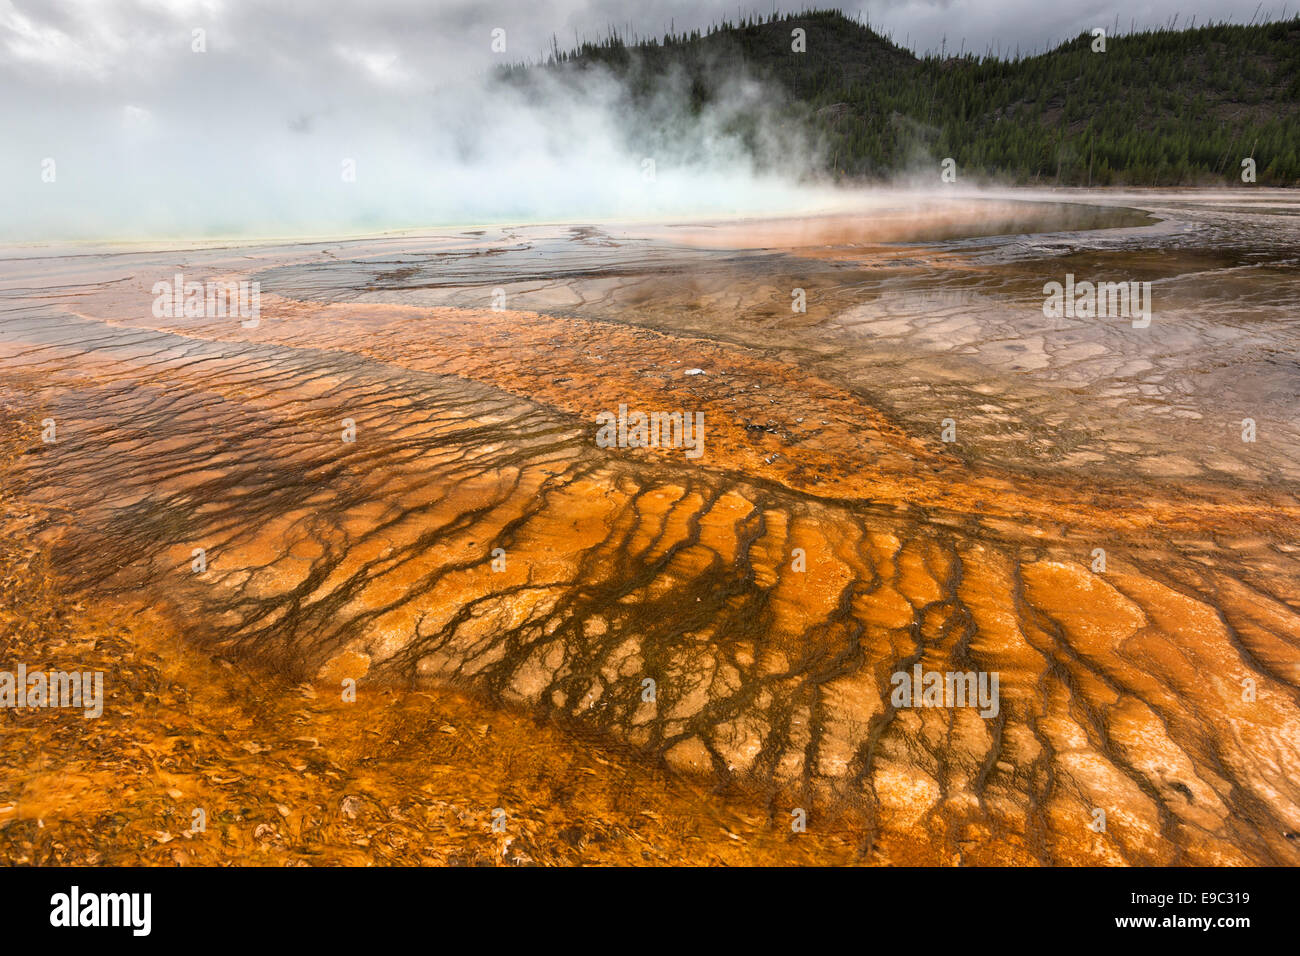 La Yellowstone Grand Prismatic Spring Banque D'Images